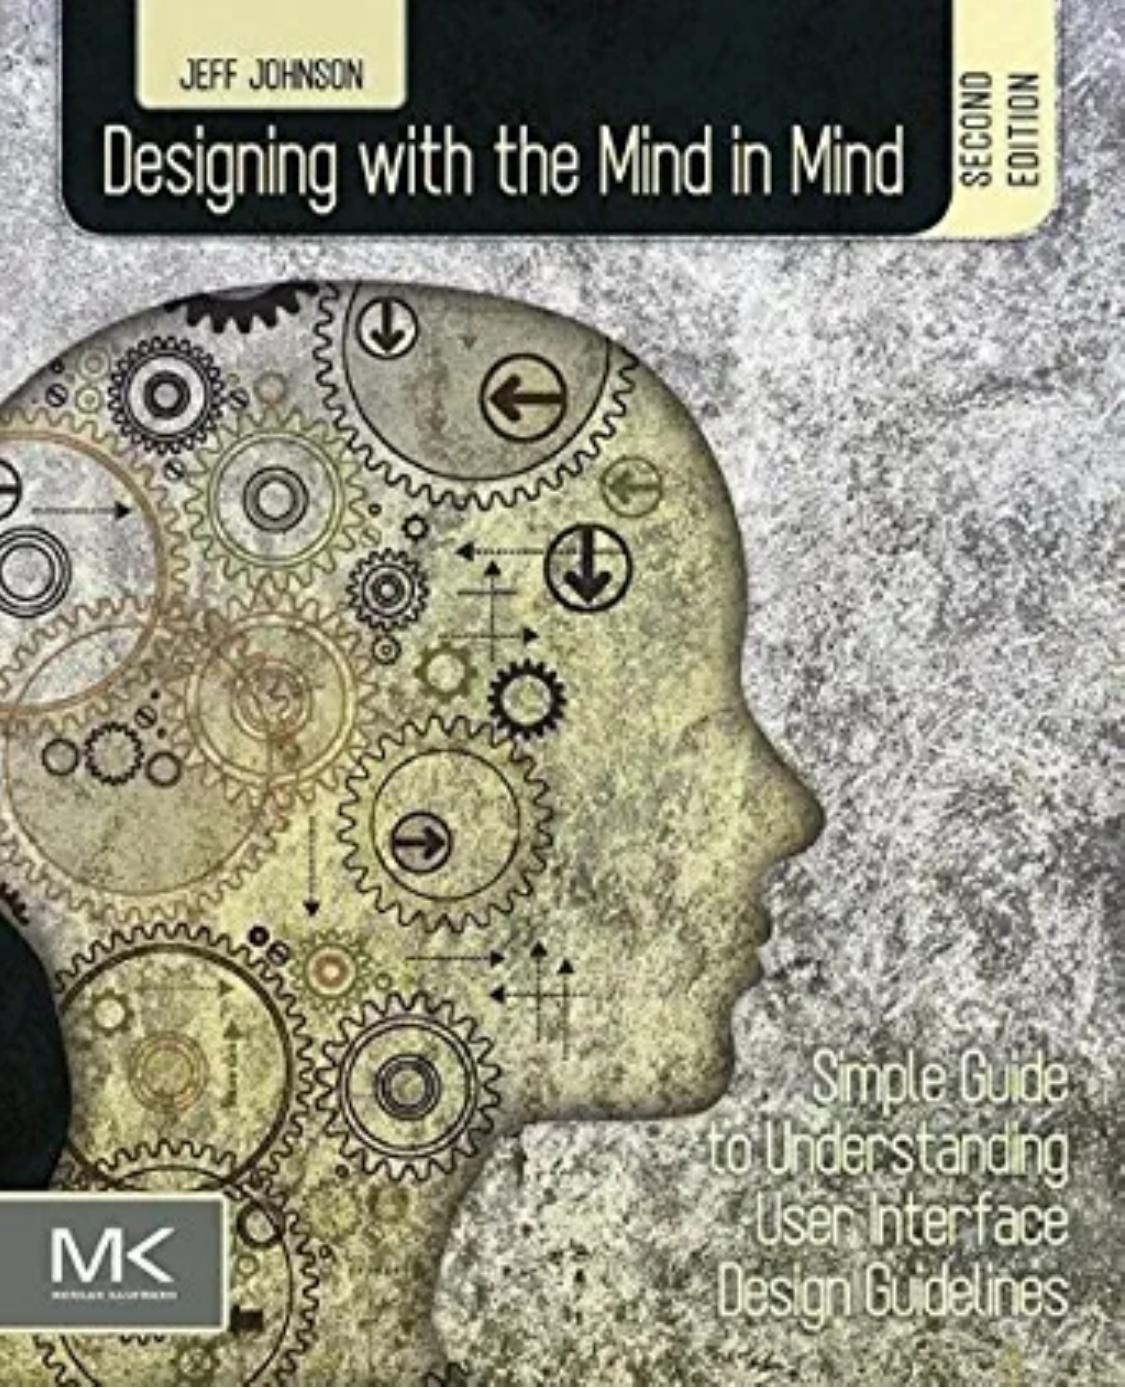 Designing with the Mind in Mind Simple Guide to Understanding User Interface Design Guidelines 2nd.jpg